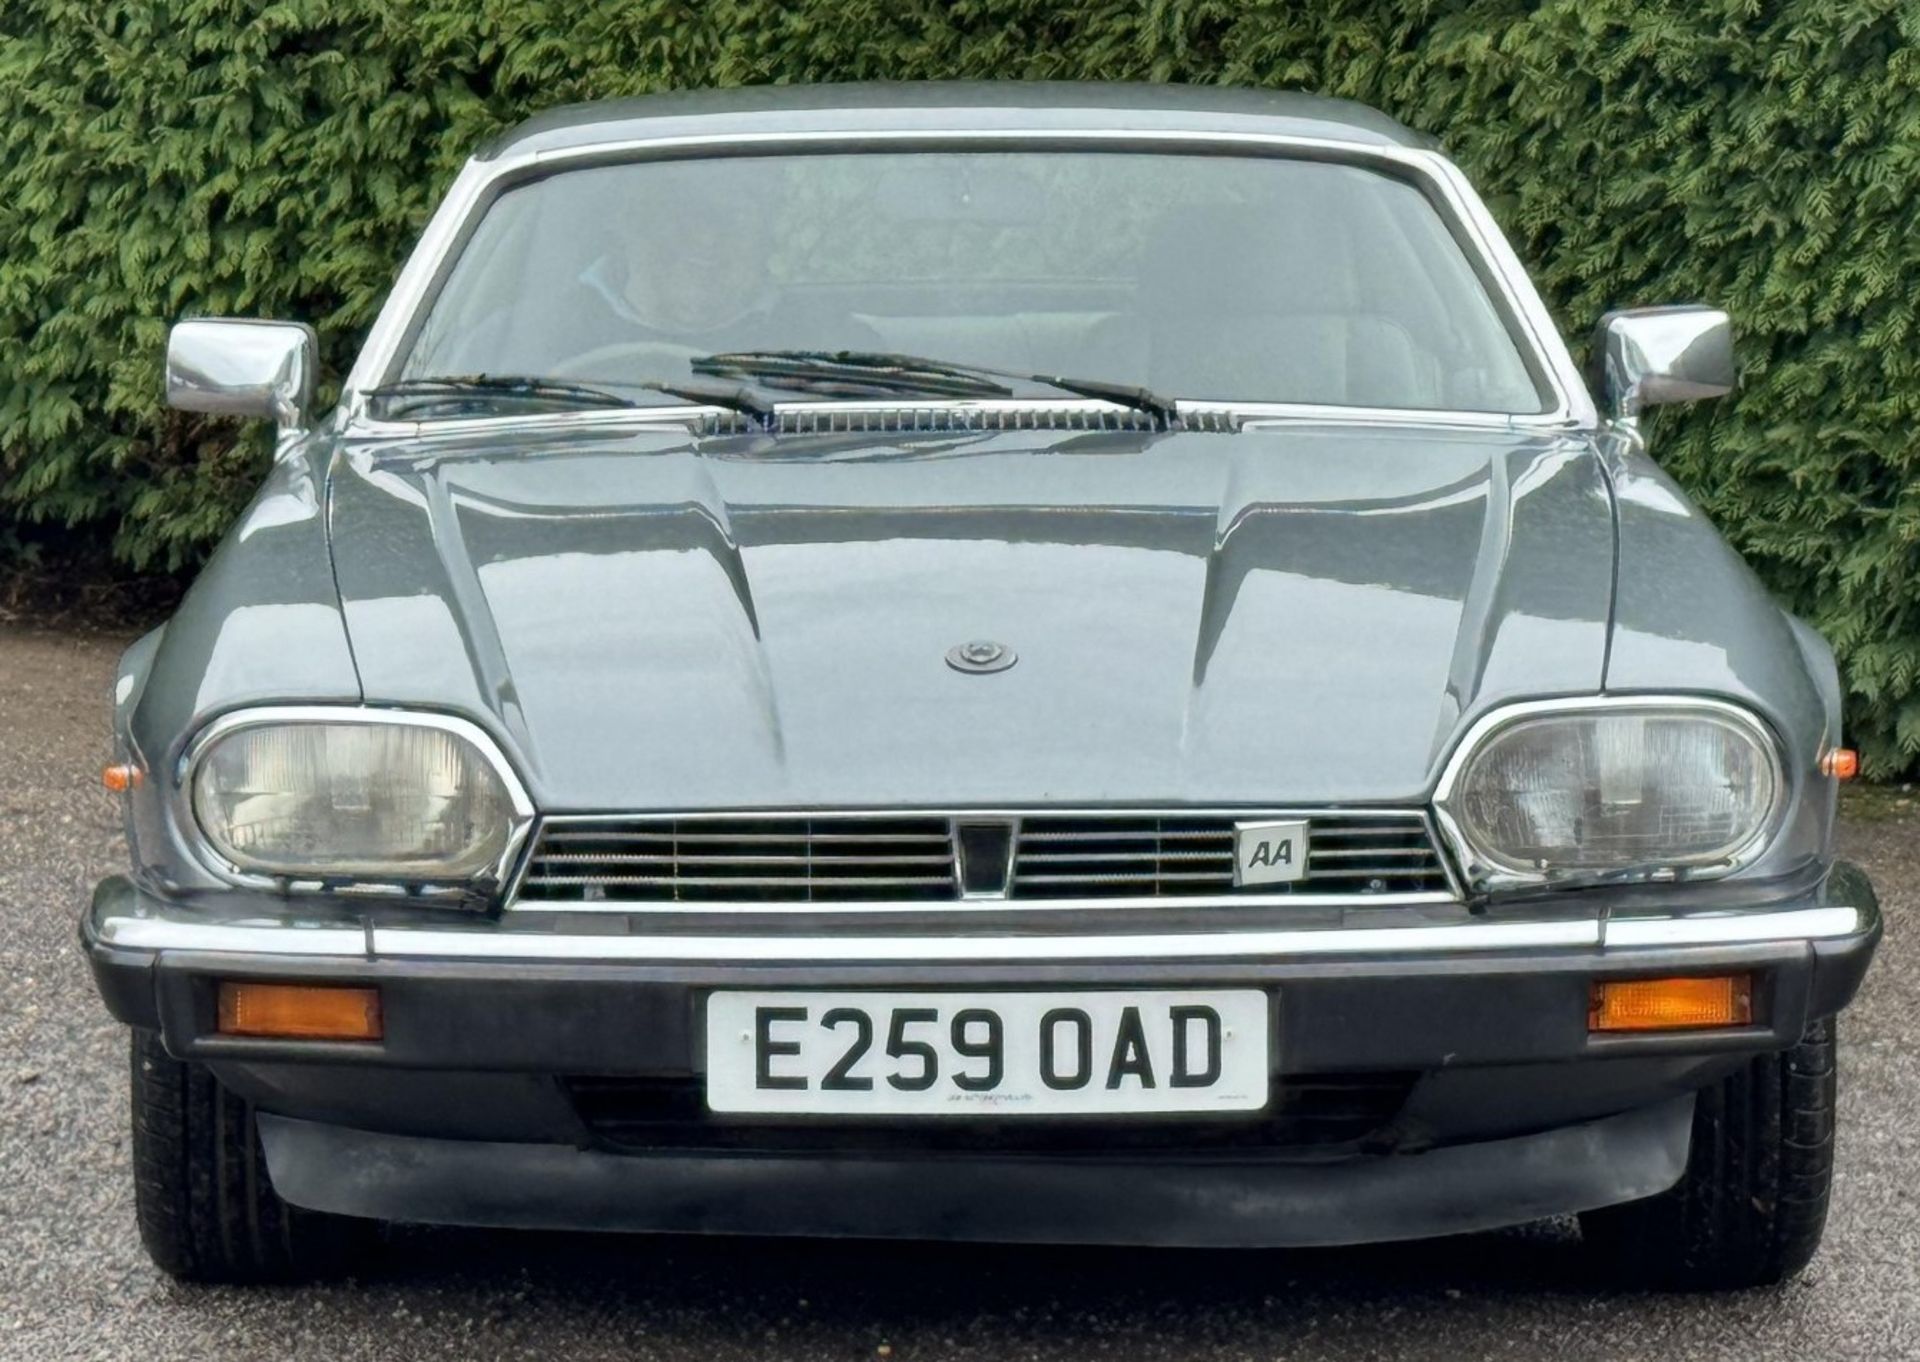 1988 Jaguar XJ-S 3.6 Coupe Registration number E259 OAD Metallic light blue with a half leather - Image 8 of 24